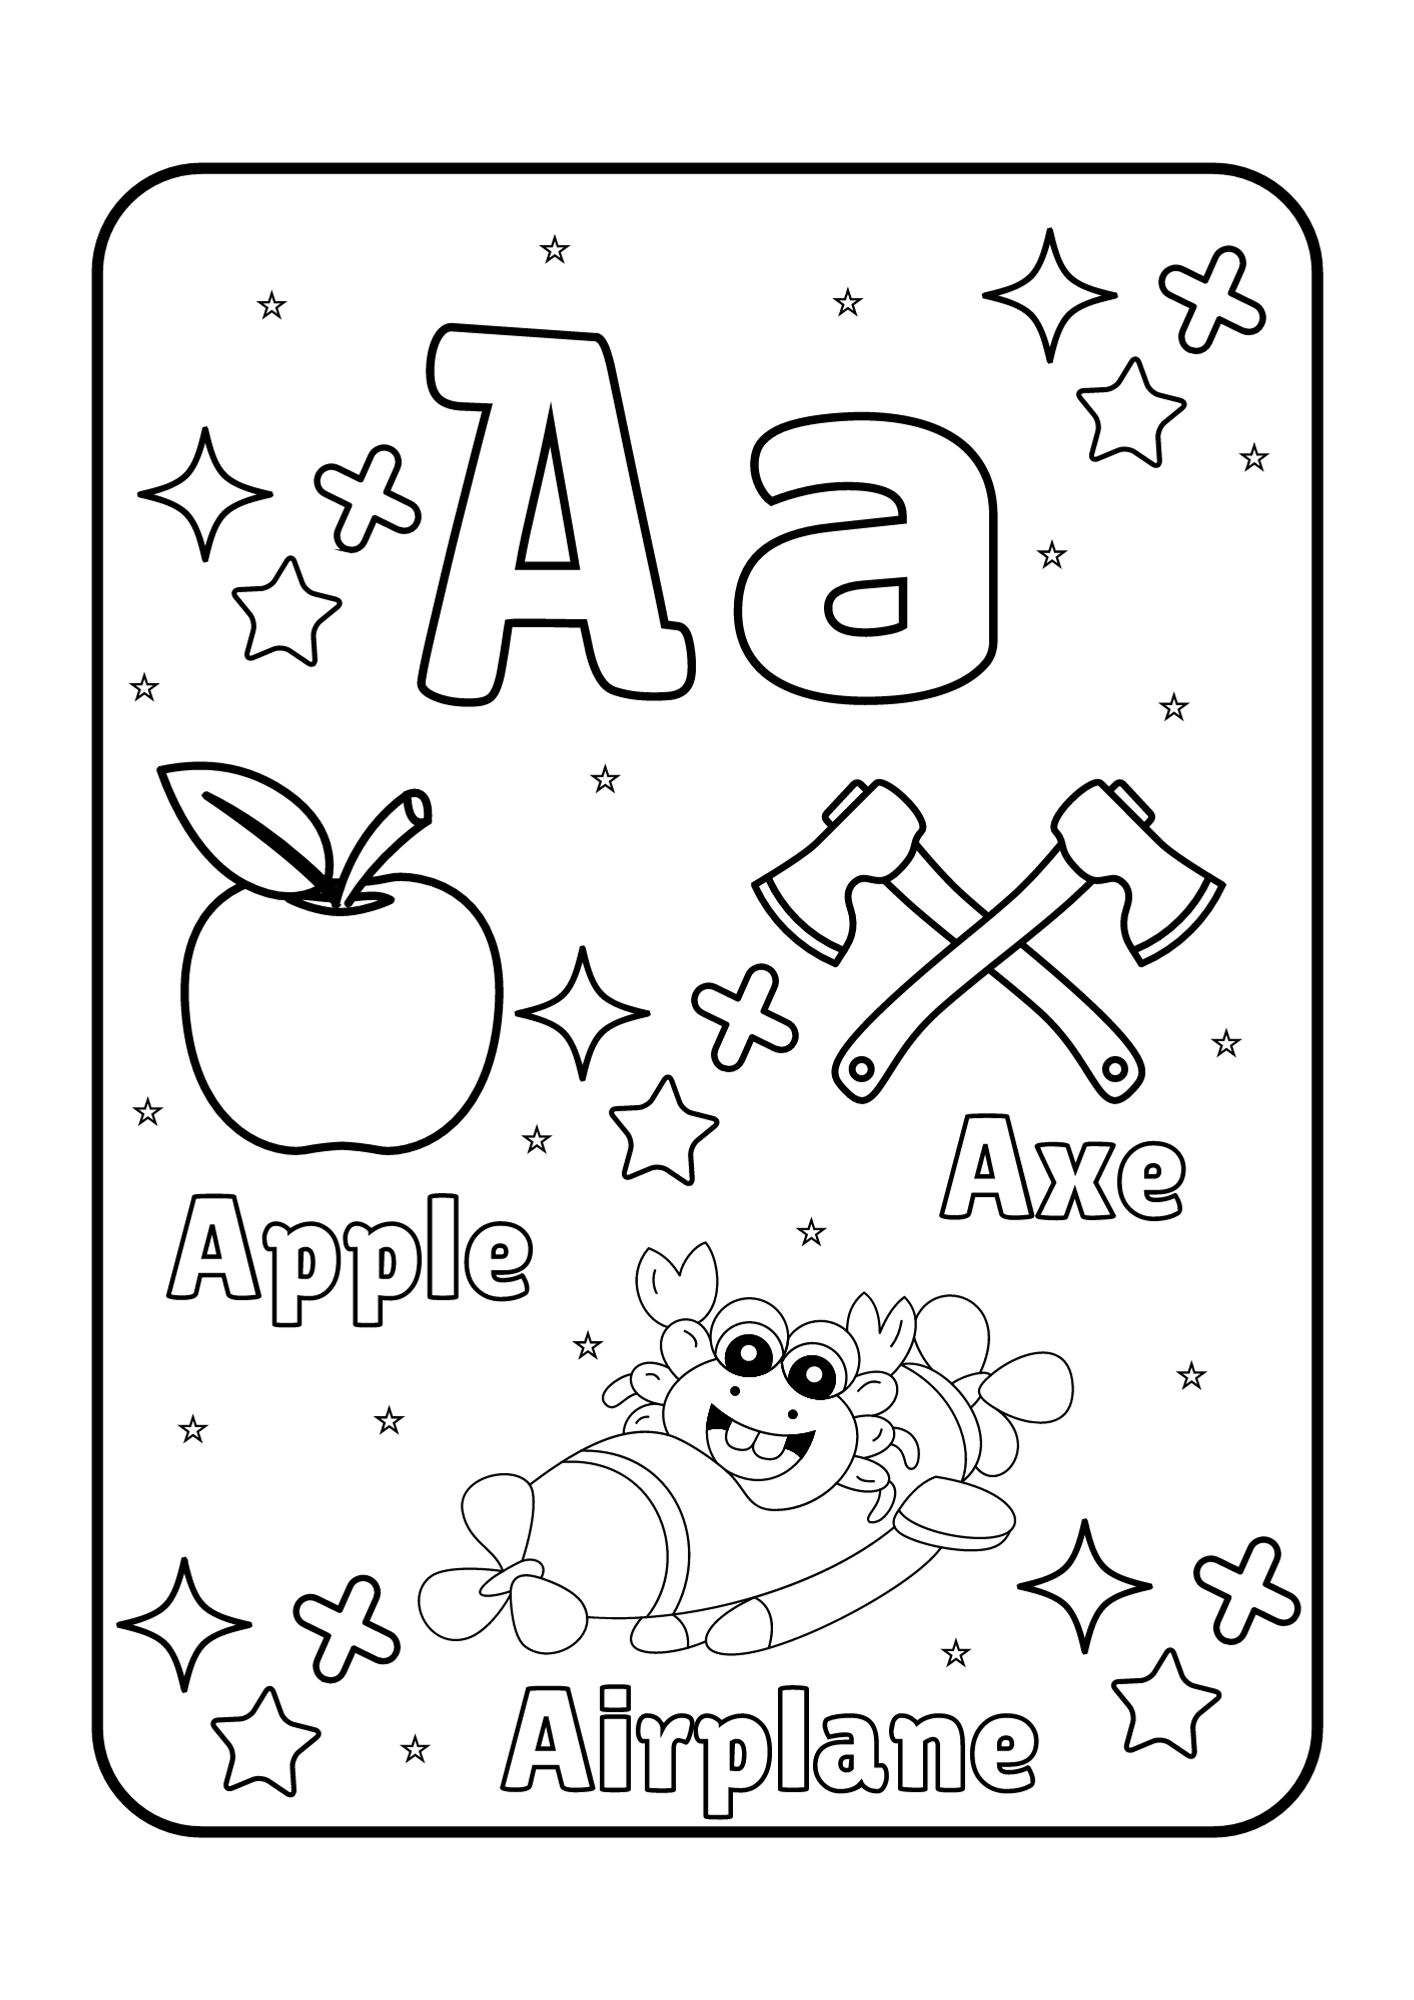 Alphabet Practice and Coloring 1